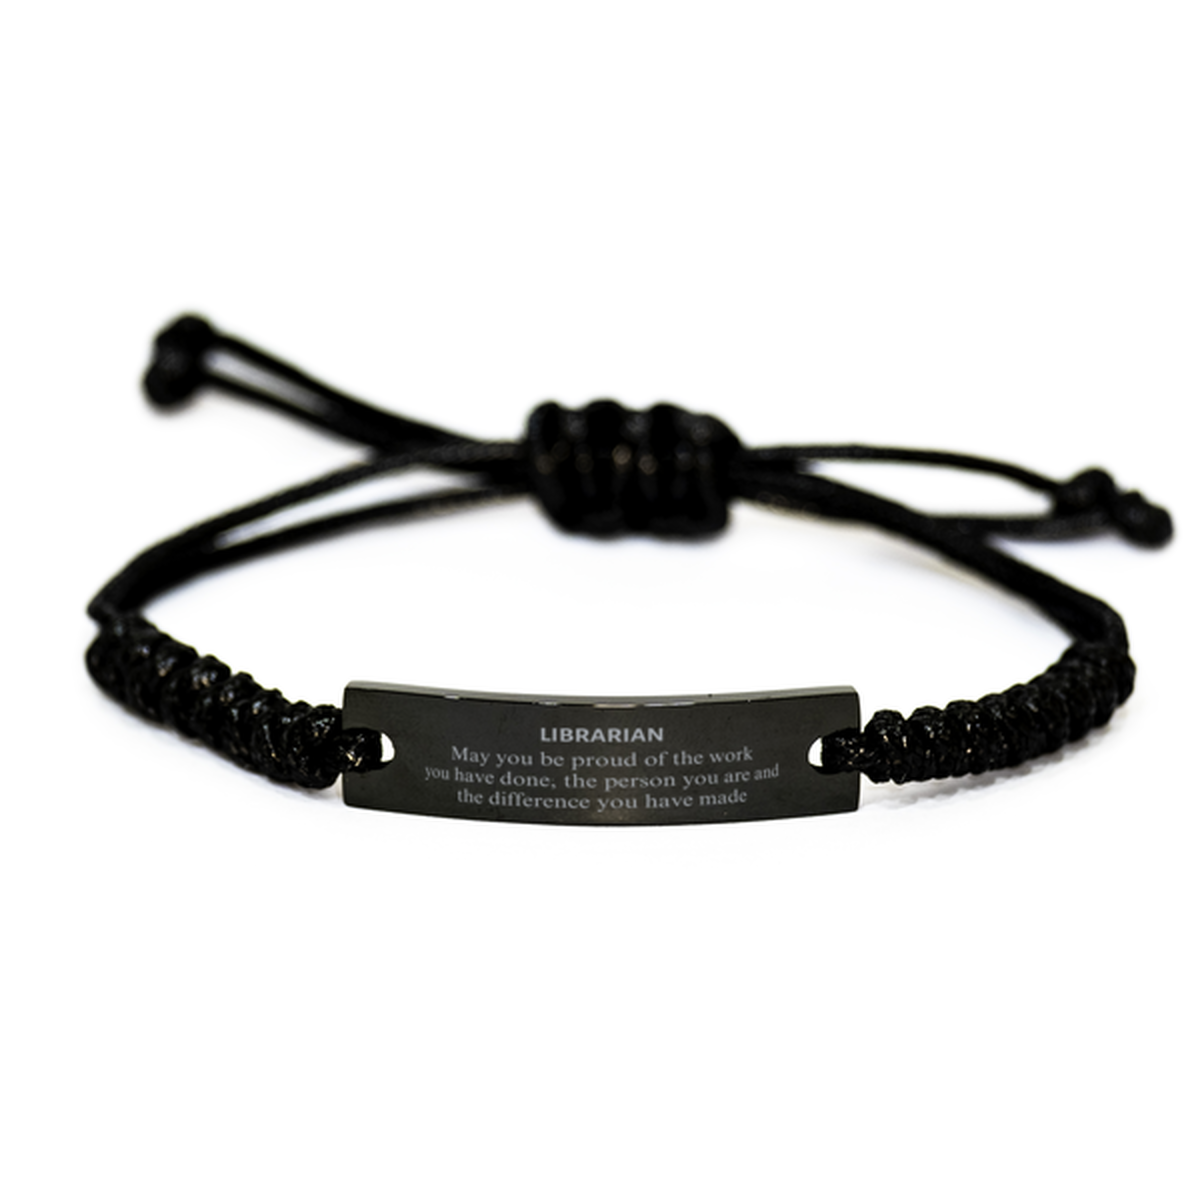 Librarian May you be proud of the work you have done, Retirement Librarian Black Rope Bracelet for Colleague Appreciation Gifts Amazing for Librarian